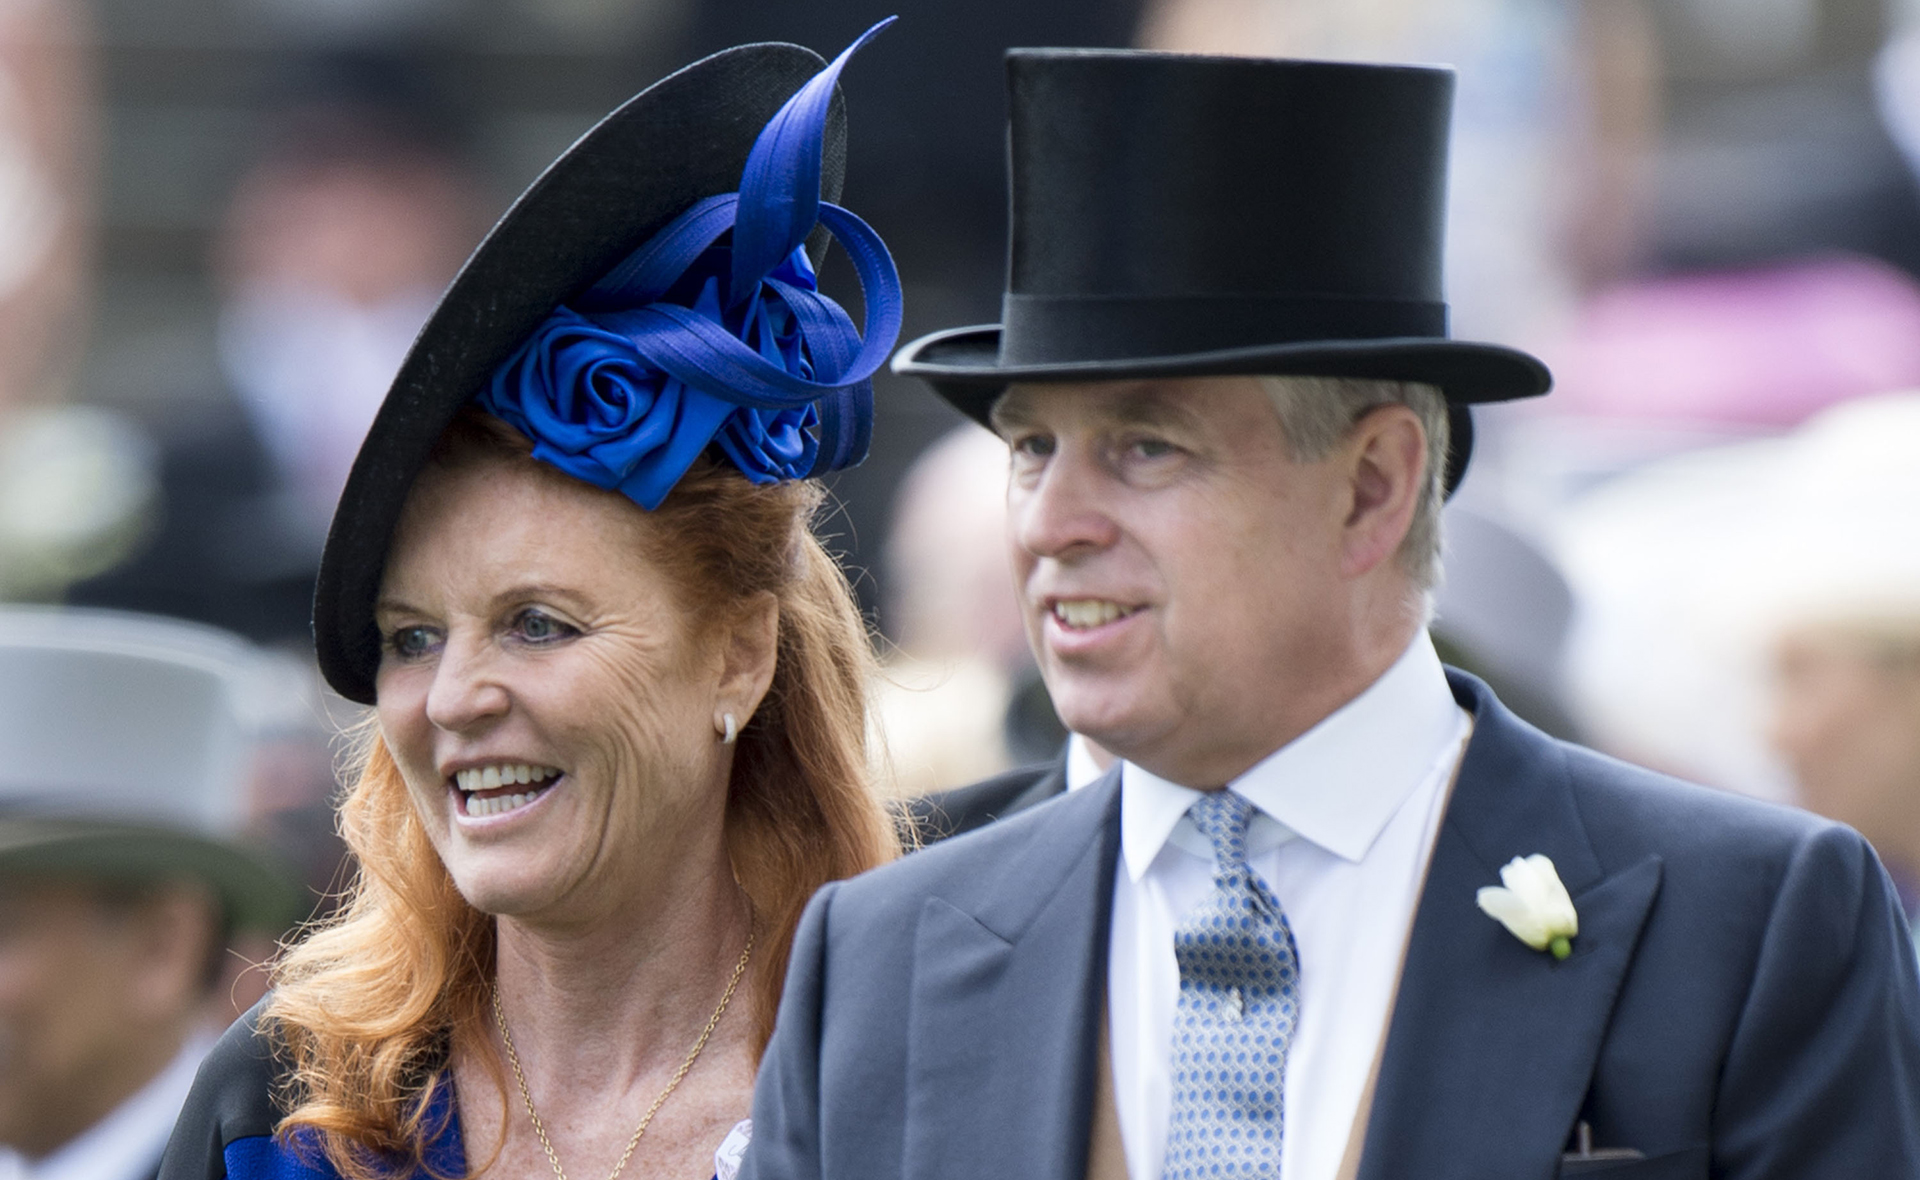 “I still love him today”: Sarah, Duchess of York defends Prince Andrew amid his ongoing Jeffrey Epstein scandal